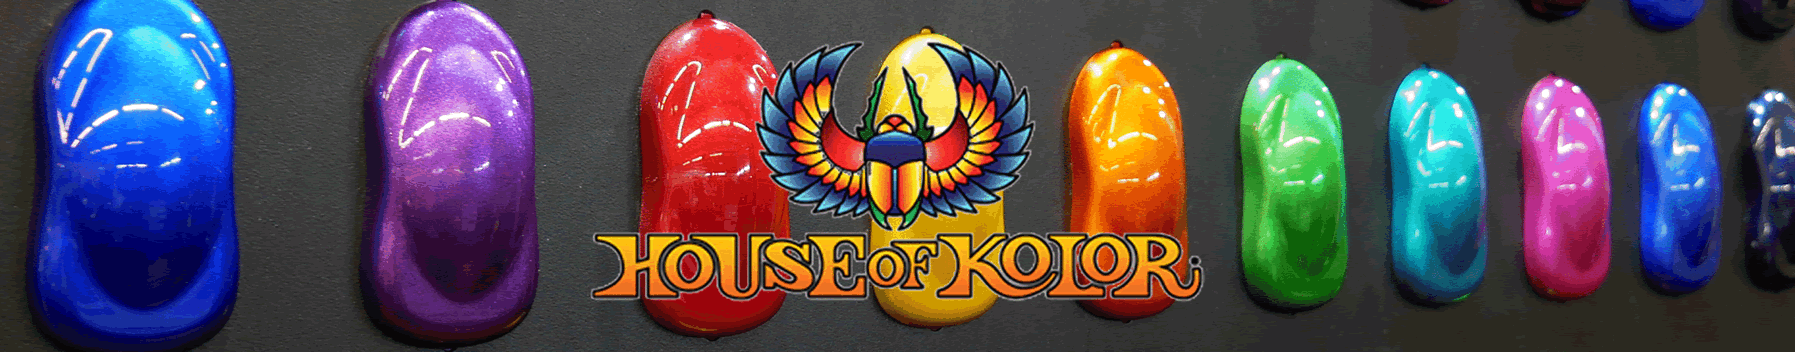 House Of Kolor From Jawel Paints